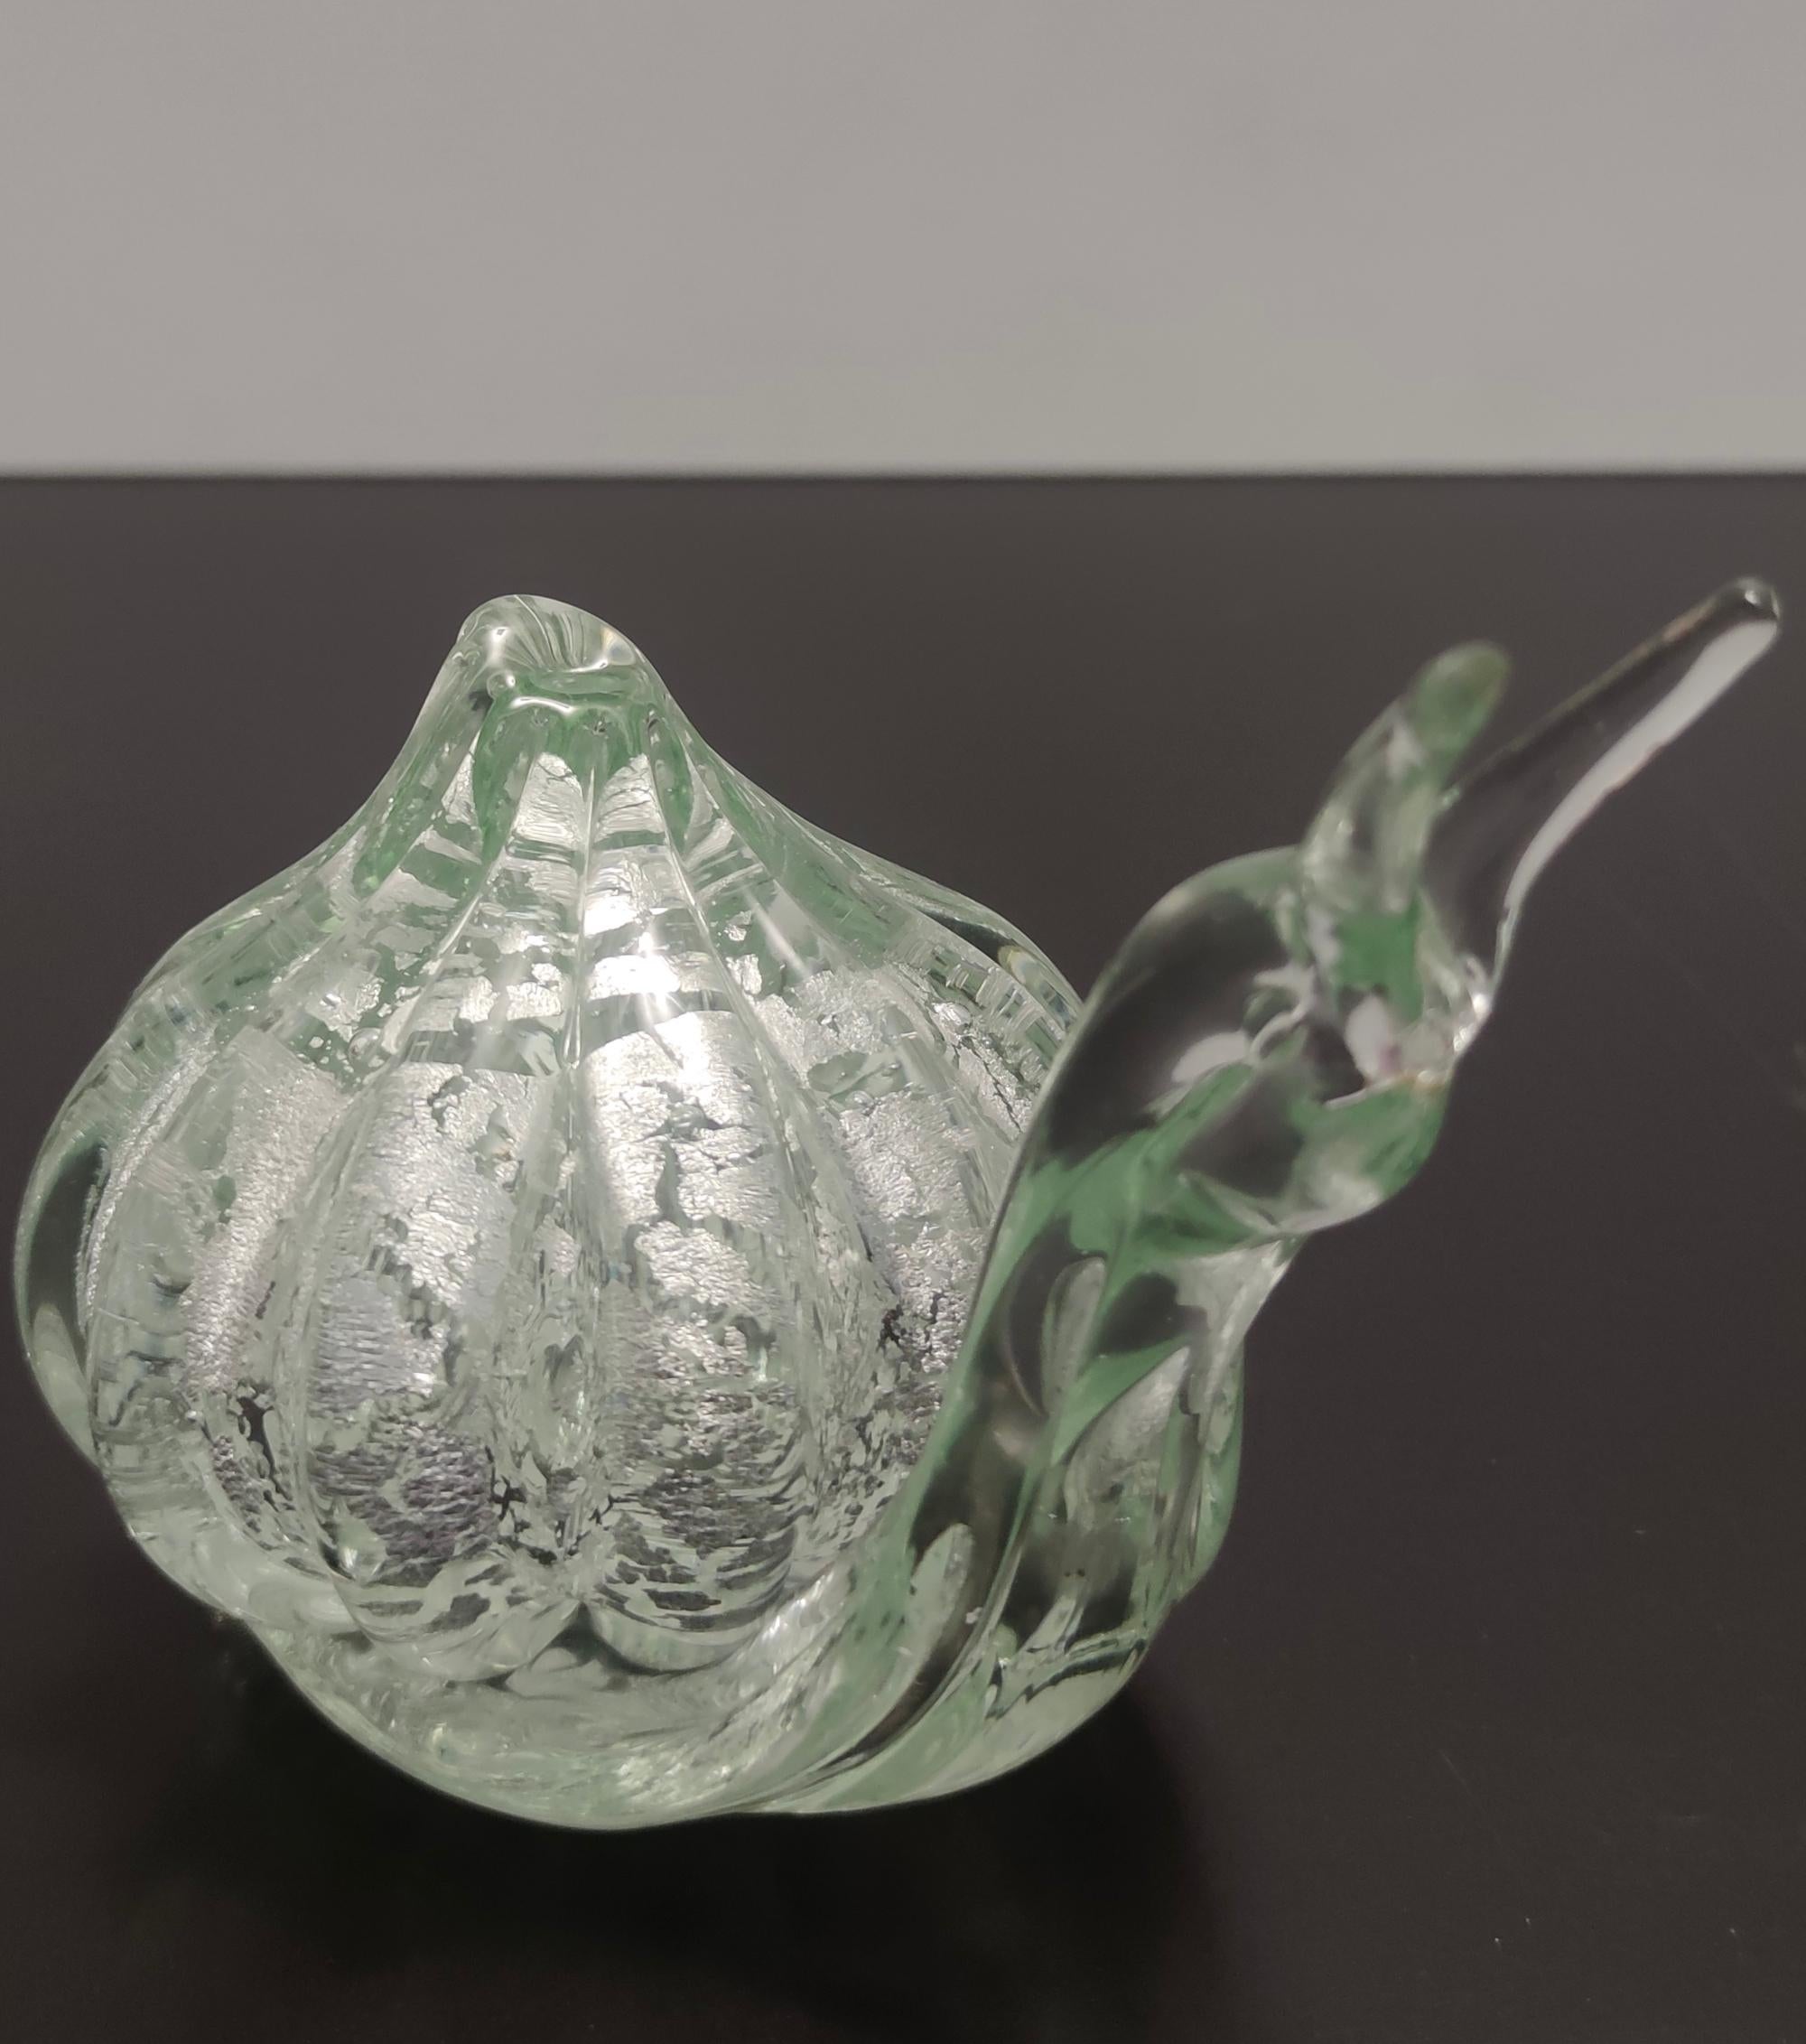 Late 20th Century Postmodern Murano Glass Snail Decorative Figure by La Murrina with Silver Flakes